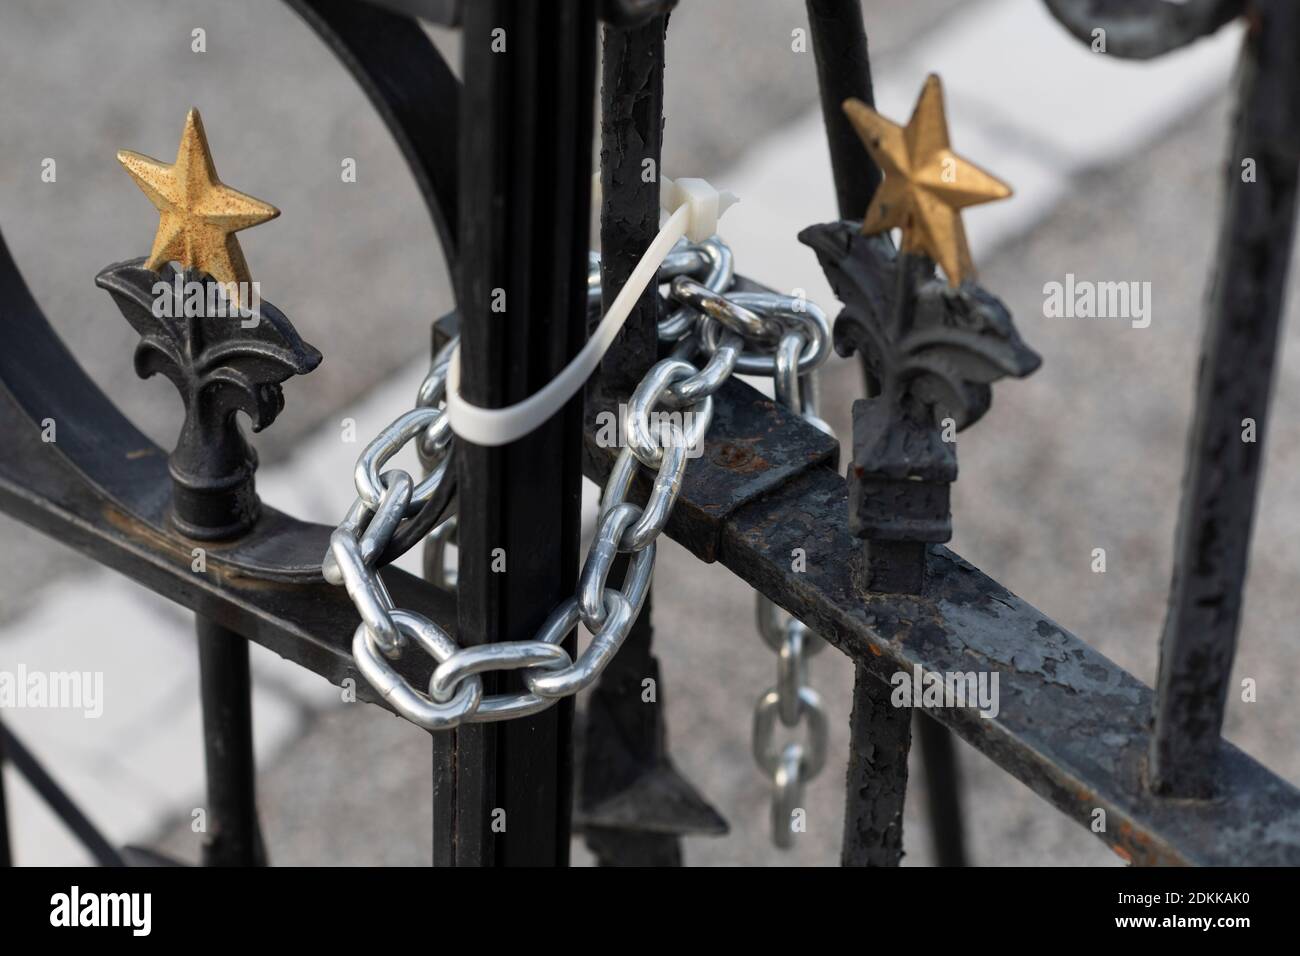 Austin, TX USA December 15, 2020: Locked gates of the Texas Capitol in Austin the evening before Texas Governor Greg Abbott ordered the grounds reopened to the public. The Capitol has been closed for months following vandalism to the grounds and building during protests against police violence after the murder of George Floyd in May, 2020. Credit: Bob Daemmrich/Alamy Live News Stock Photo